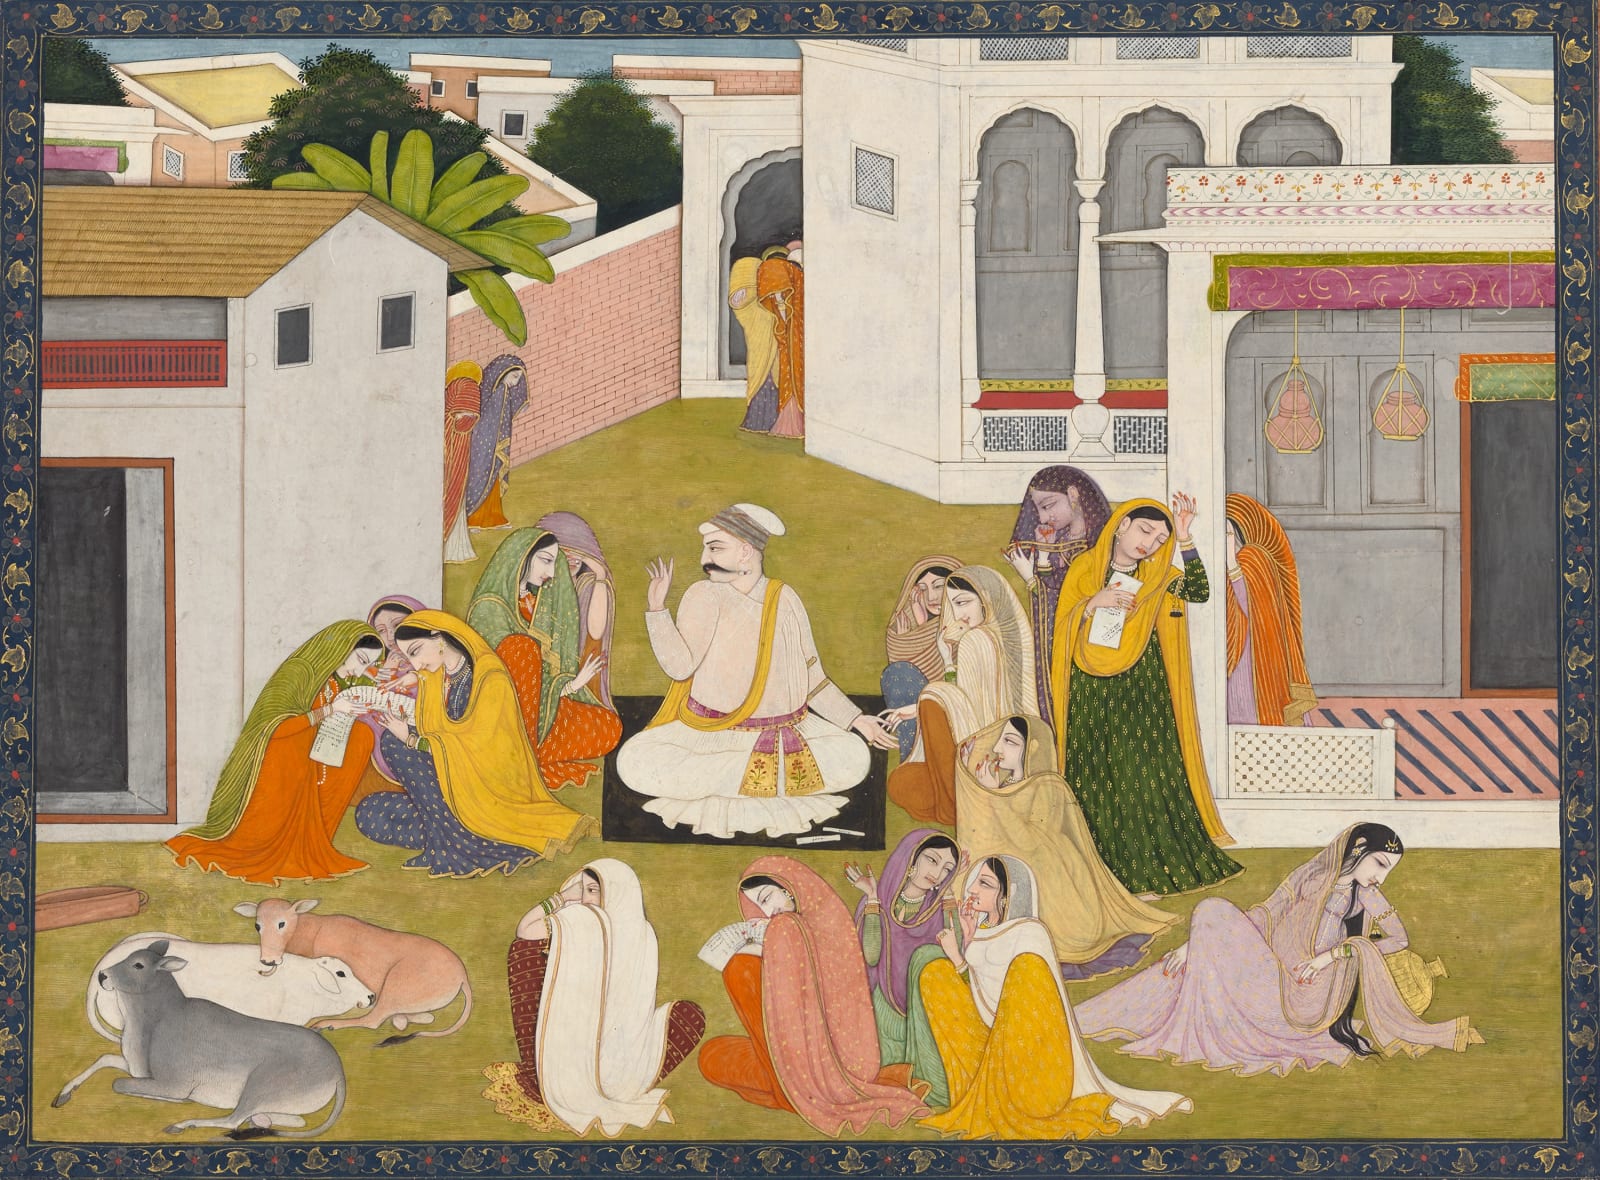 Uddhava consoling the Women of Braj - Page from a Bhagavata Purana series, Guler, c. 1790, attributed to Ranjha